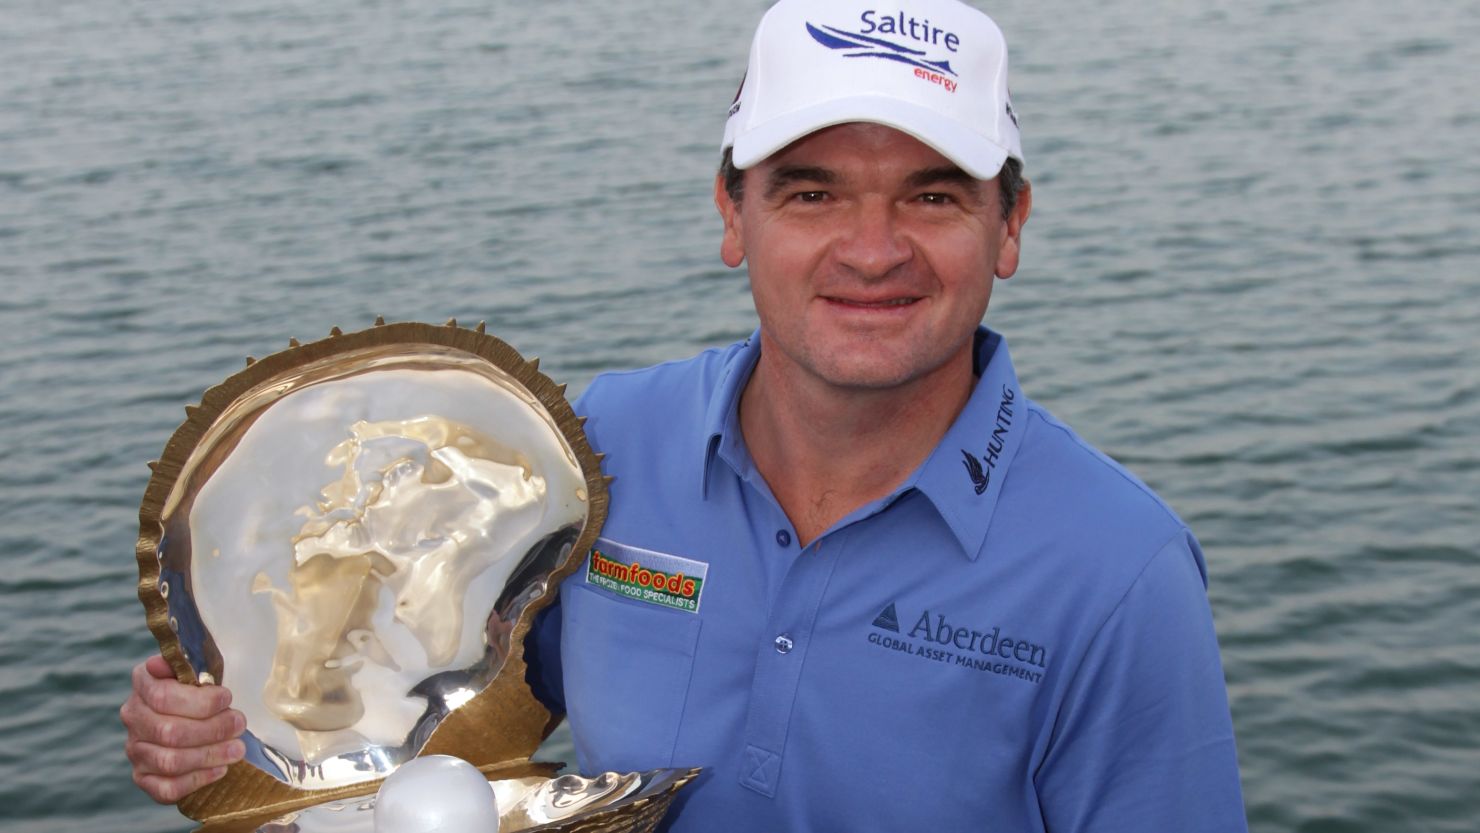 Paul Lawrie's final round 65 ensured he collected the Qatar Masters trophy for the second time in his career.